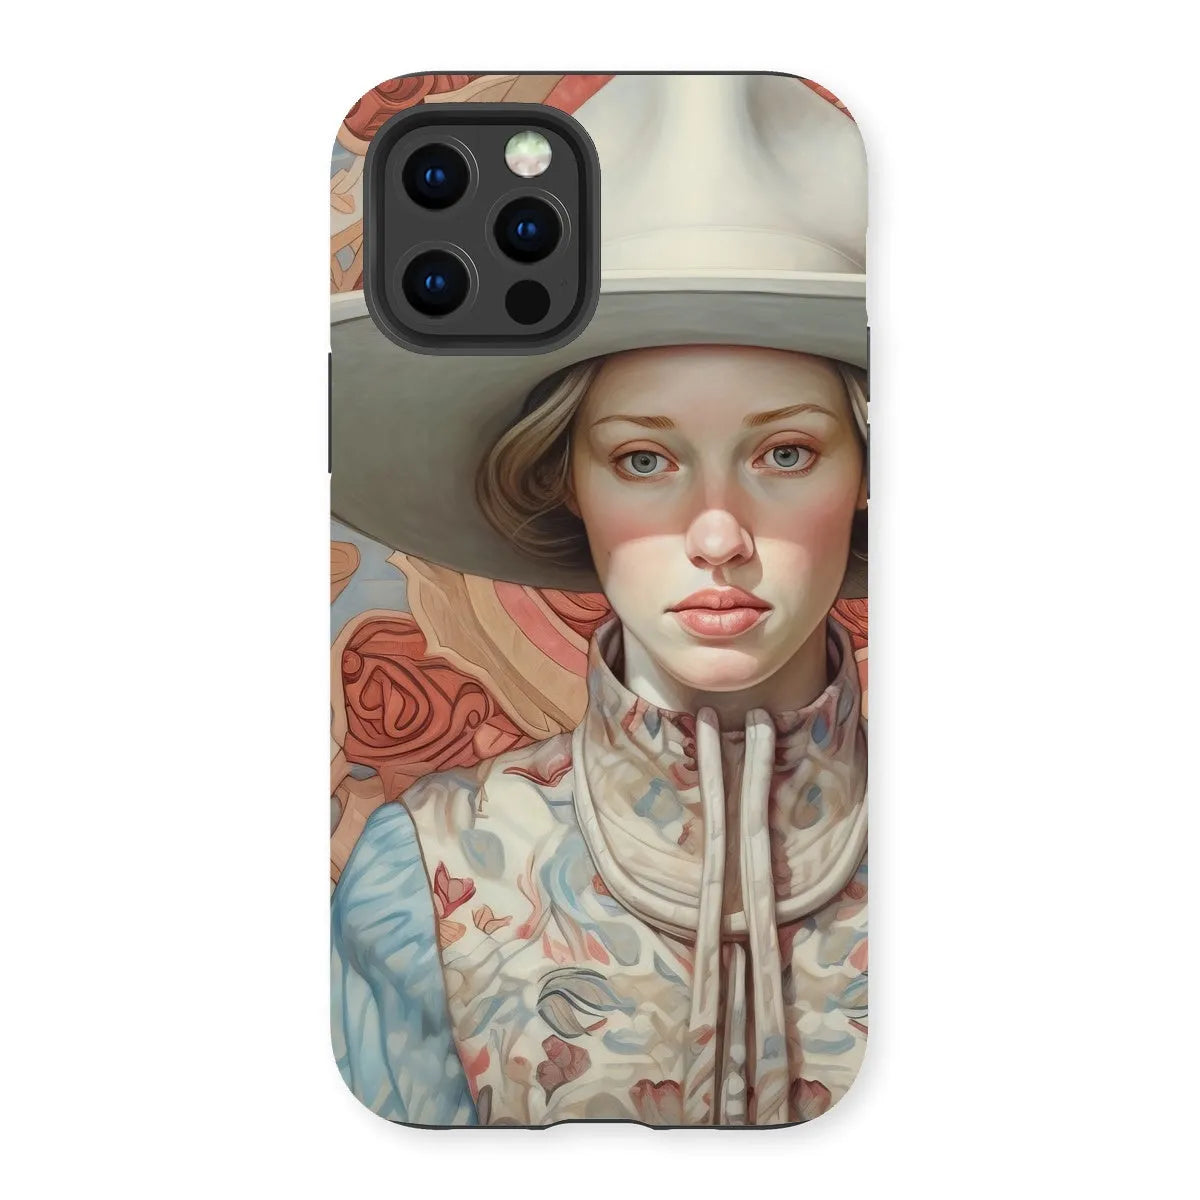 Lottie The Lesbian Cowgirl - Sapphic Art Phone Case - Iphone 13 Pro / Matte - Mobile Phone Cases - Aesthetic Art